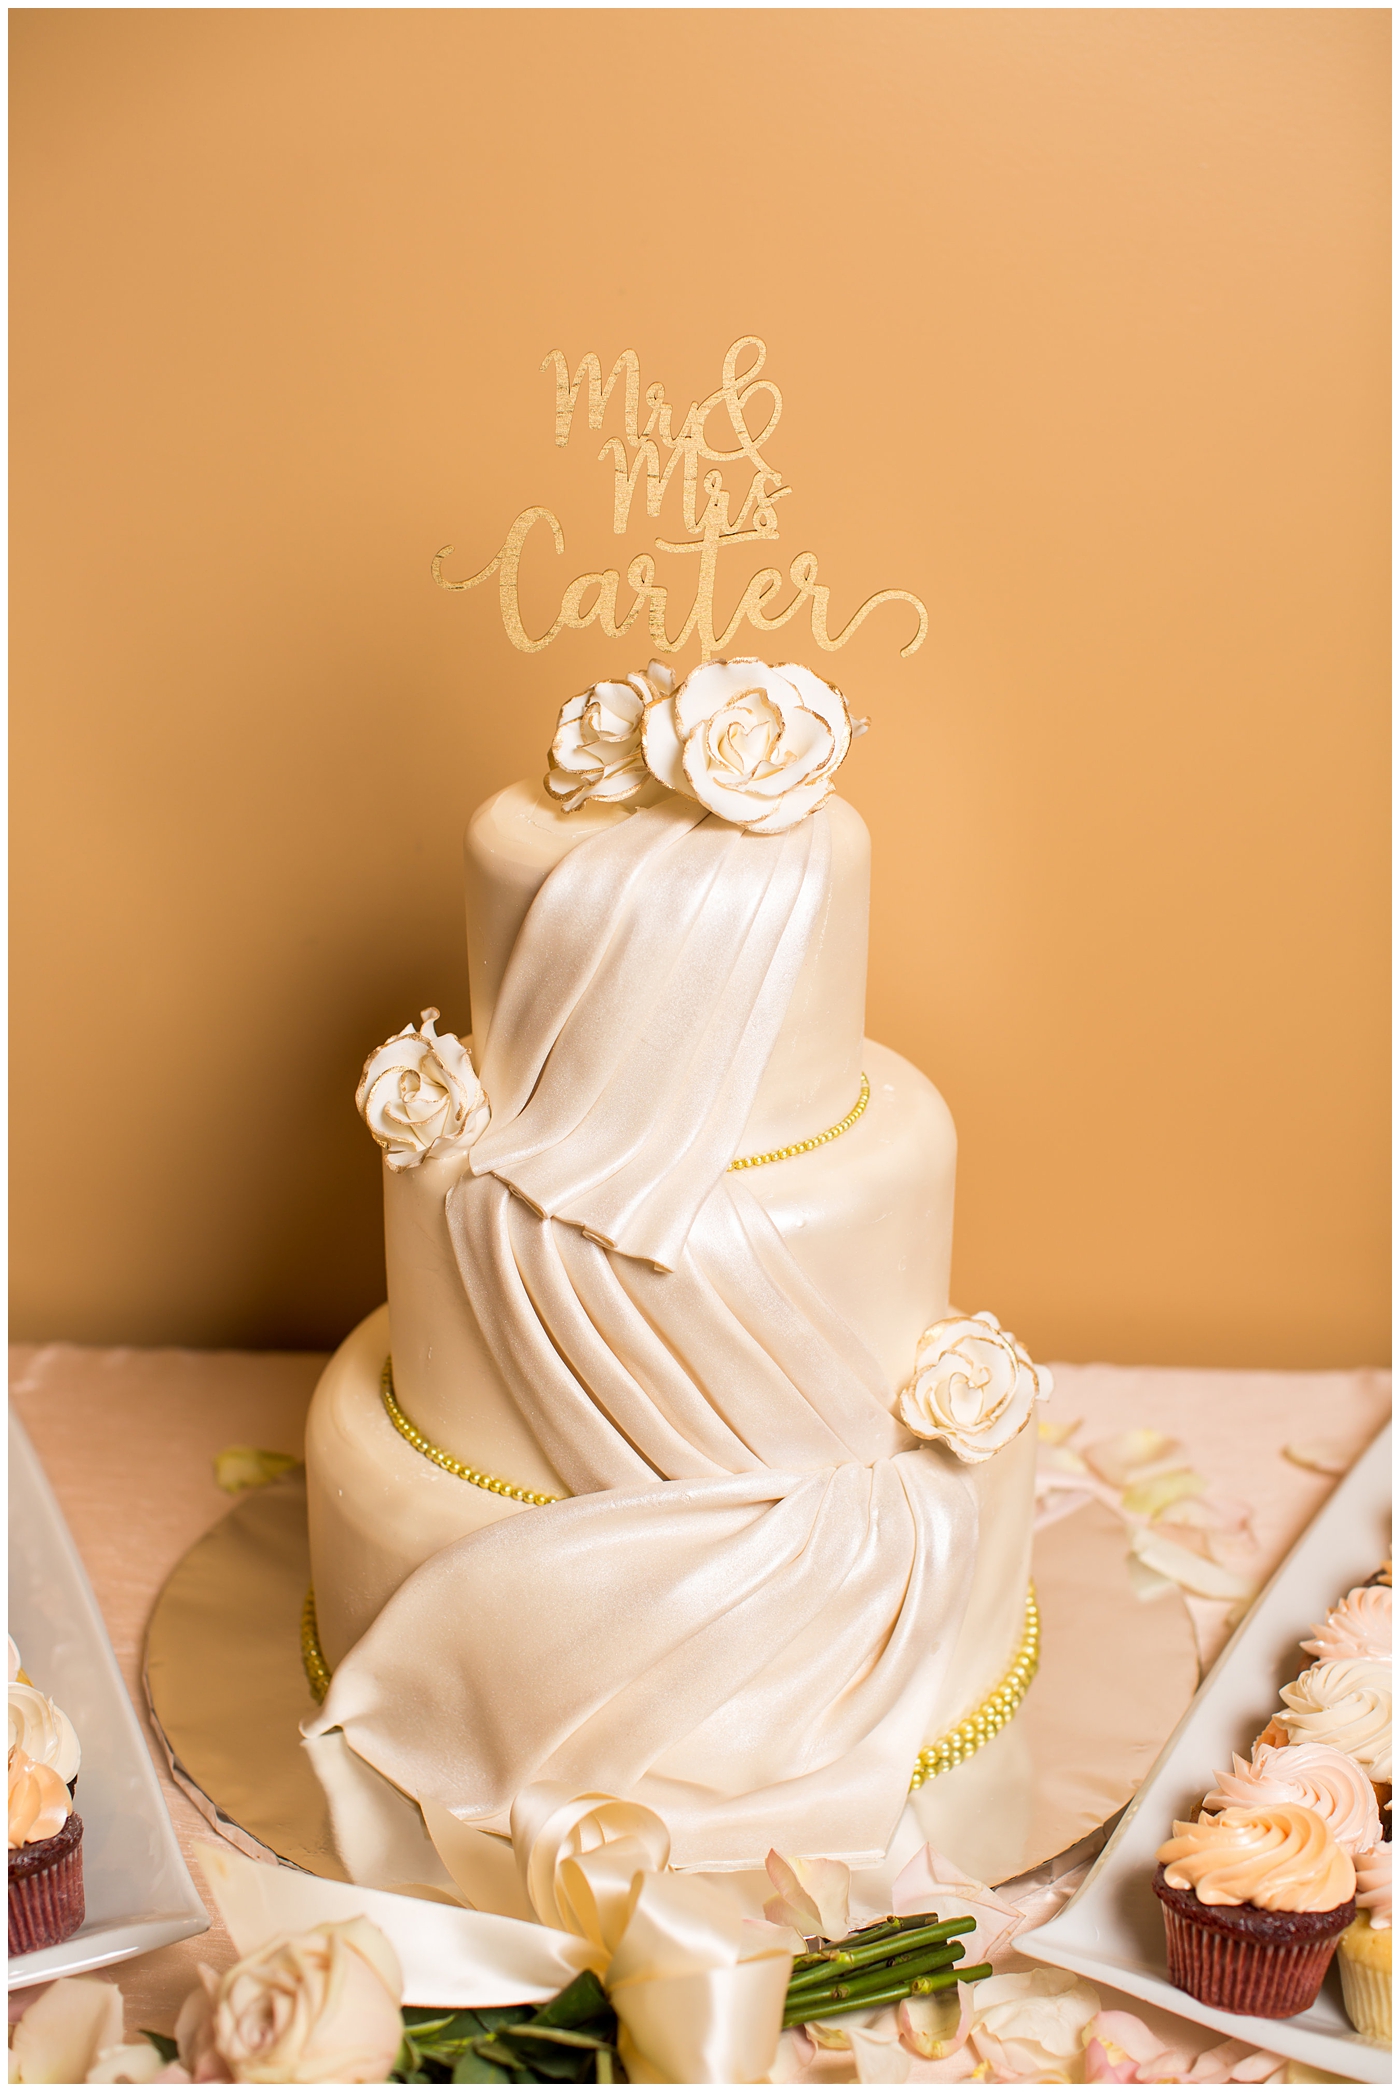 wedding cake with draped with fondant and flowers